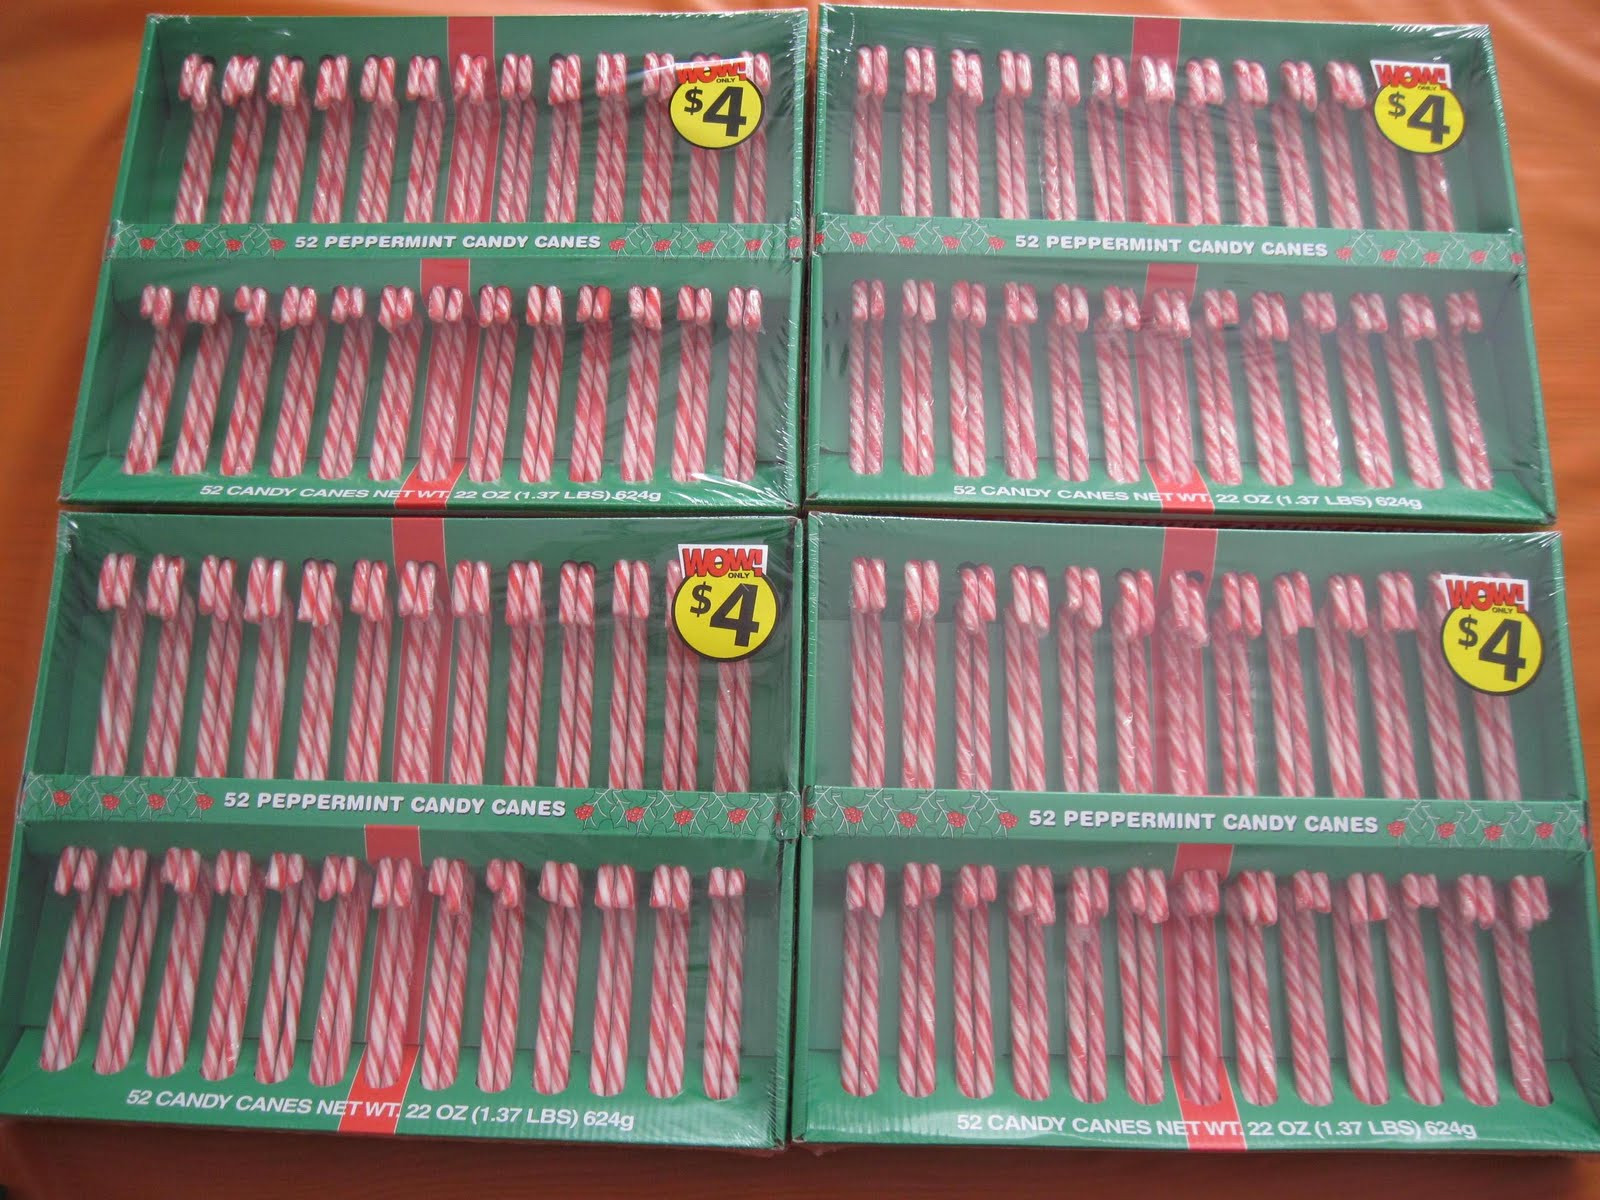 Walgreen Christmas Candy
 BEST BUY 52 Candy Canes $ 25 at Walgreens